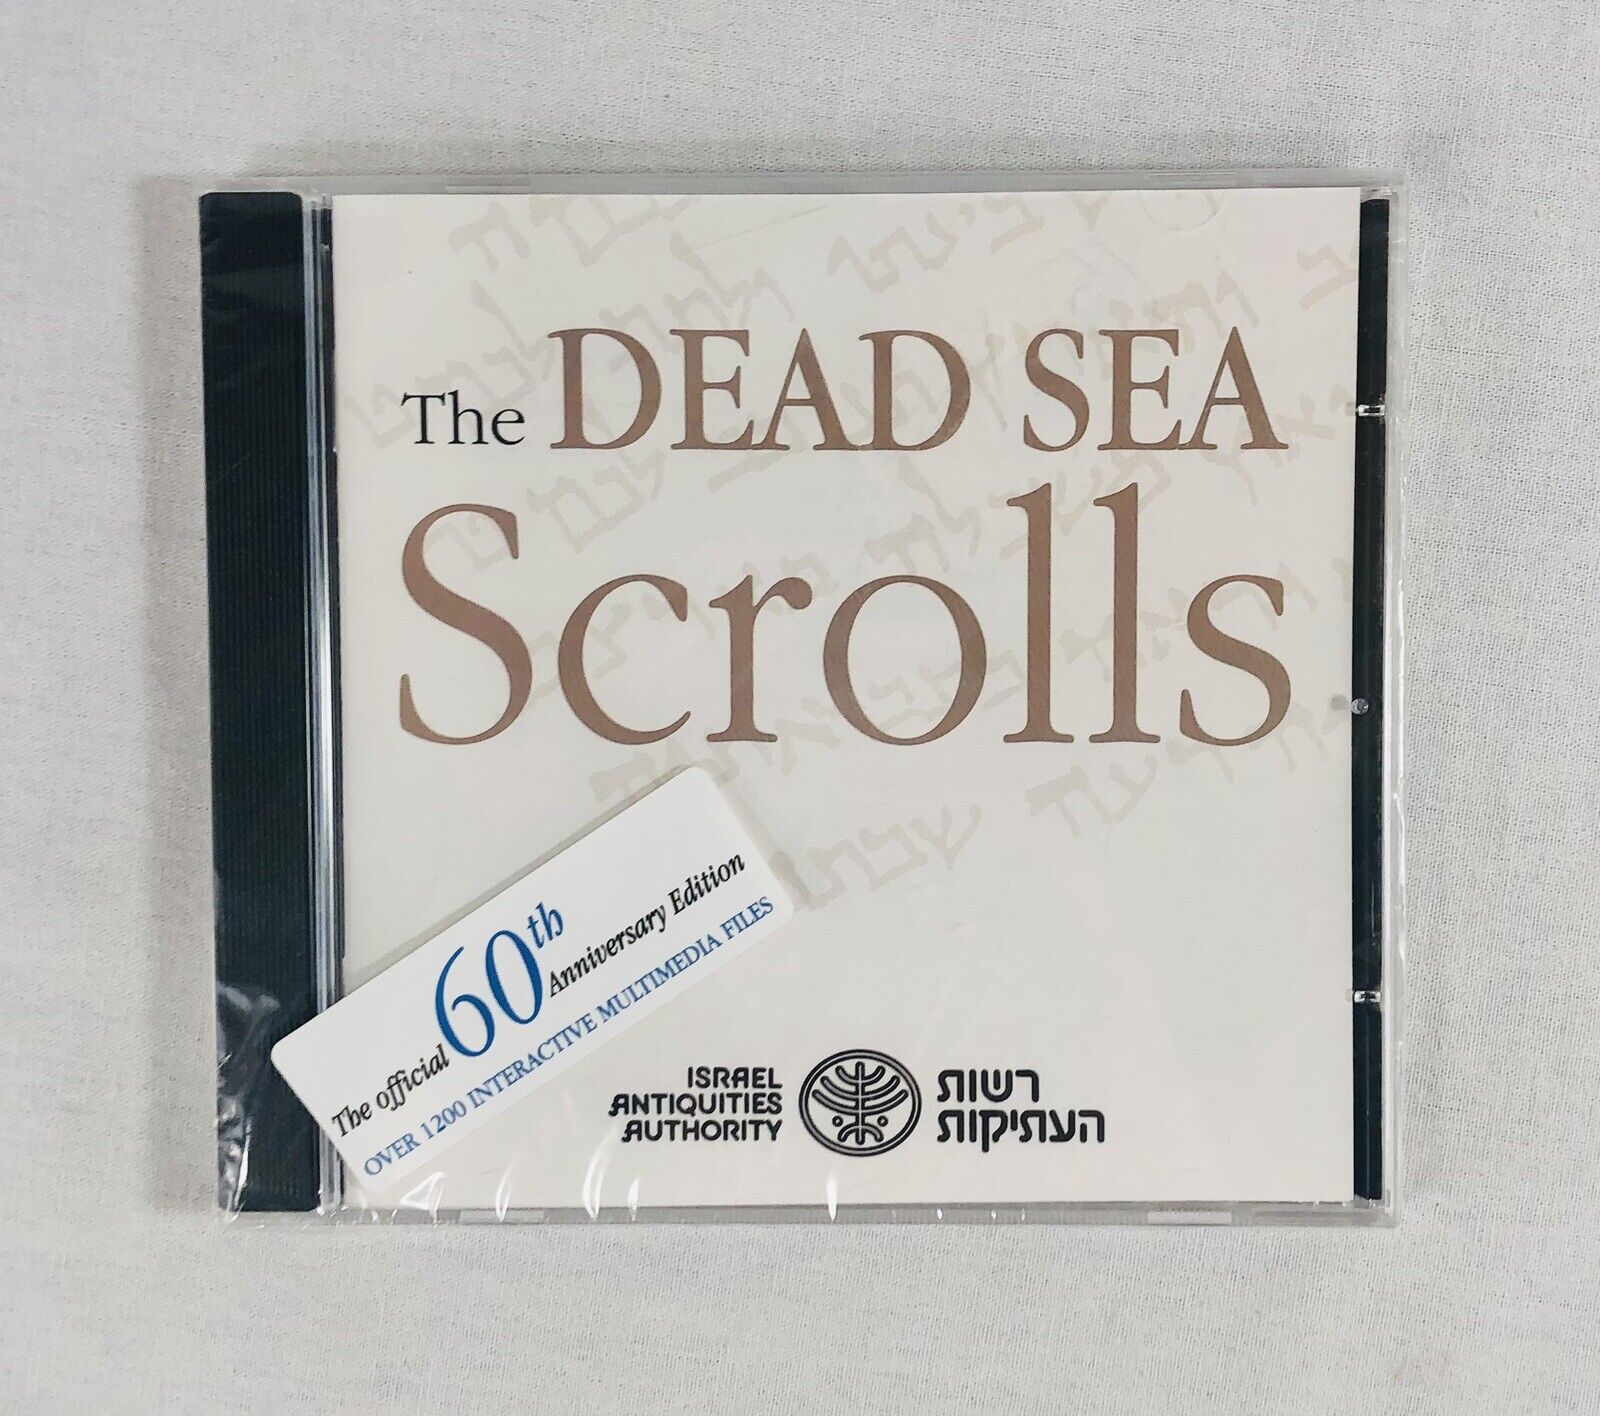 The Dead Sea Scrolls Over 1200 Interactive Media Files PC CD-ROM (Sealed)